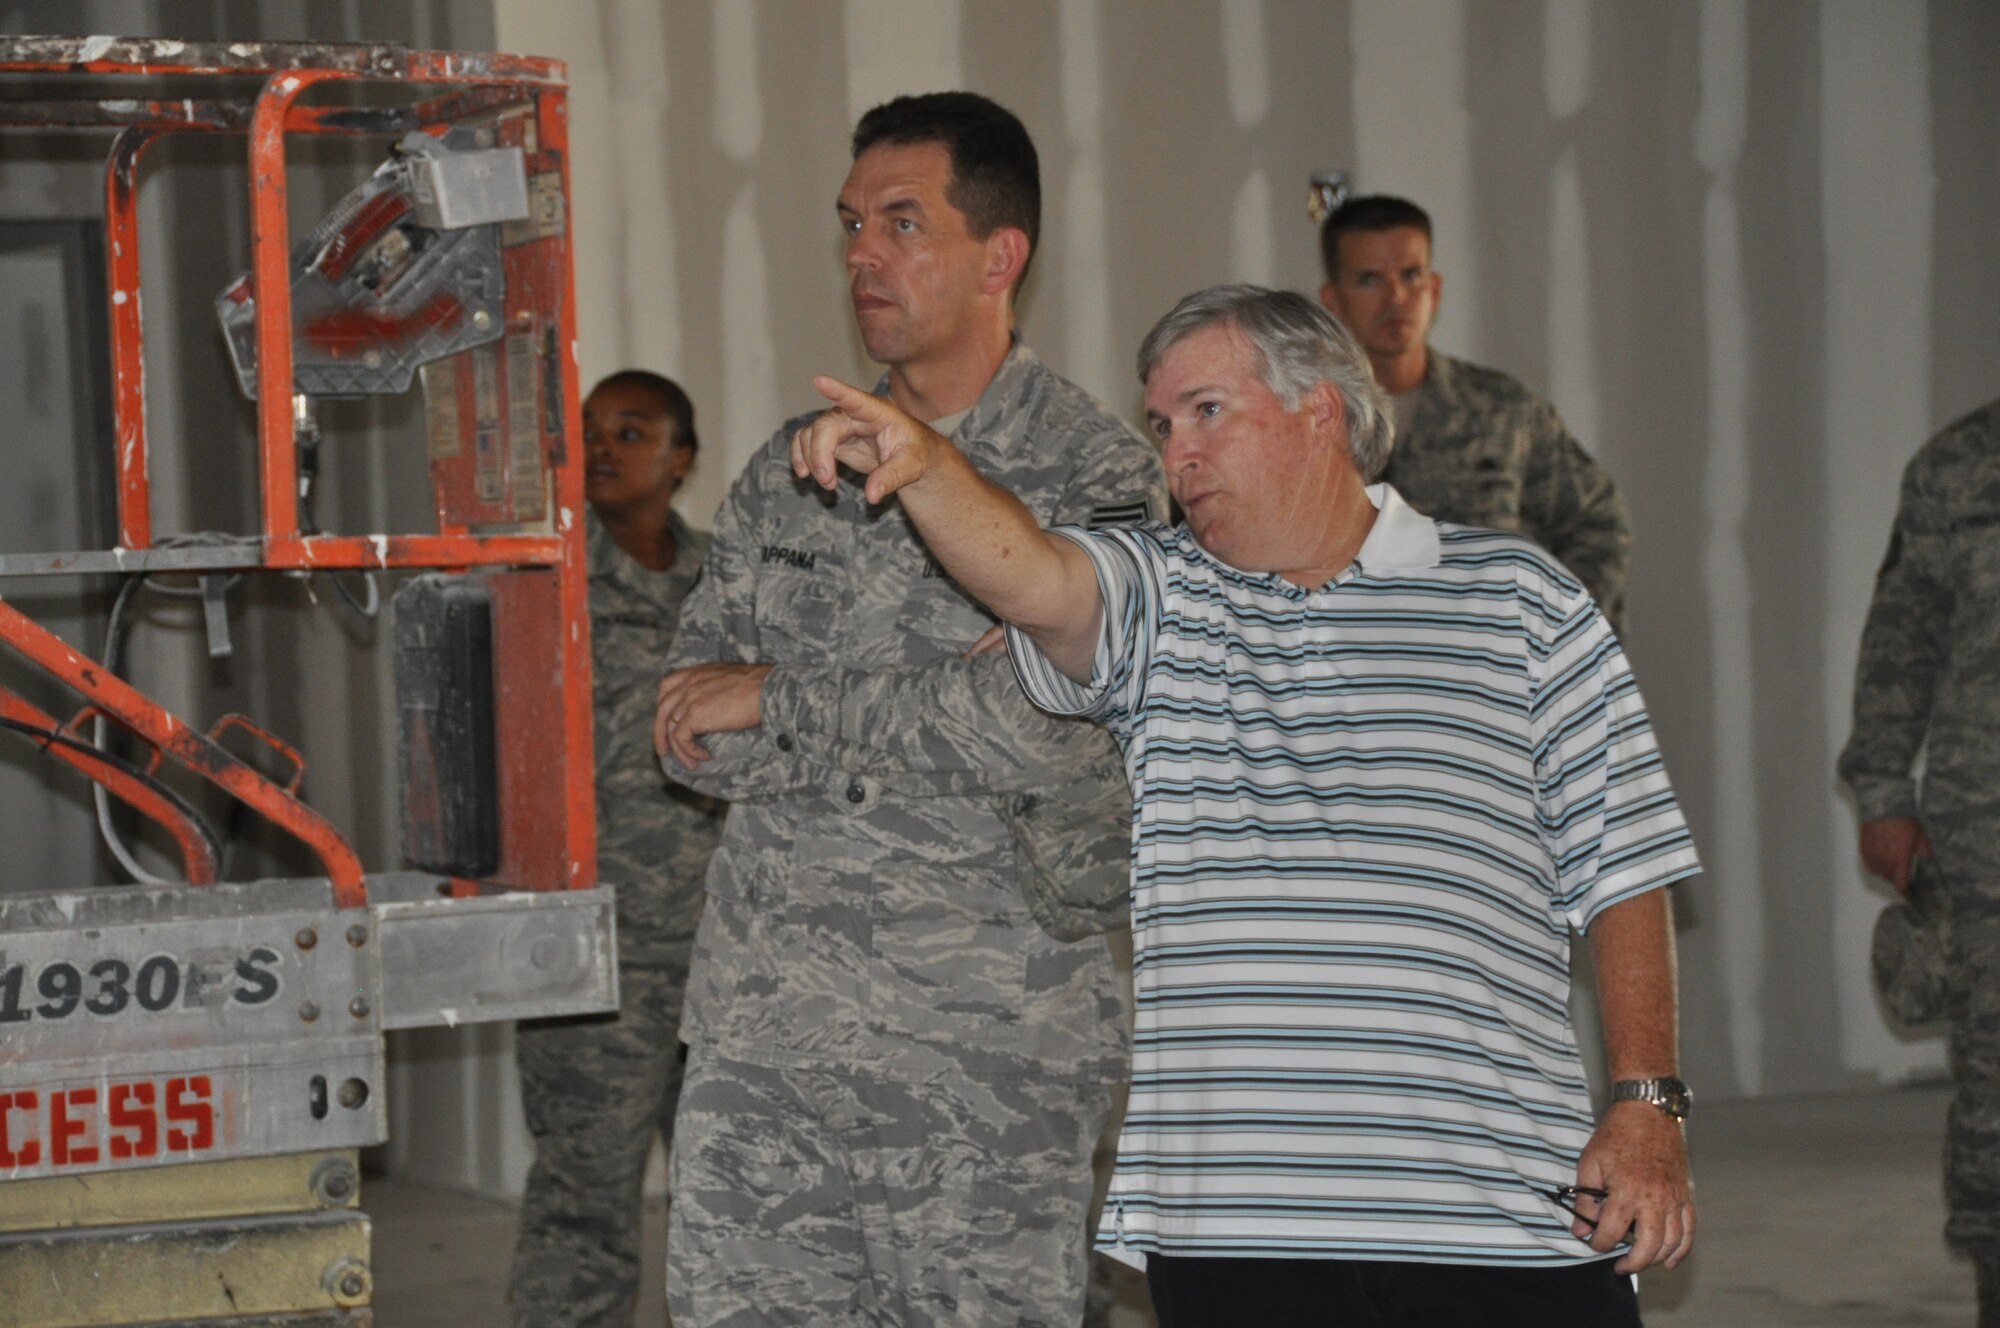 Harry Britts, 325th Civil Engineer Squadron Saber Element chief, shows Chief Master Sgt. Robert Tappana, Air Education and Training Command Command Chief, the new Horizons' Club while in its construction stages May 26 during the Chief's visit to Tyndall Air Force Base. (U.S. Air Force photo/Senior Airman Veronica McMahon)